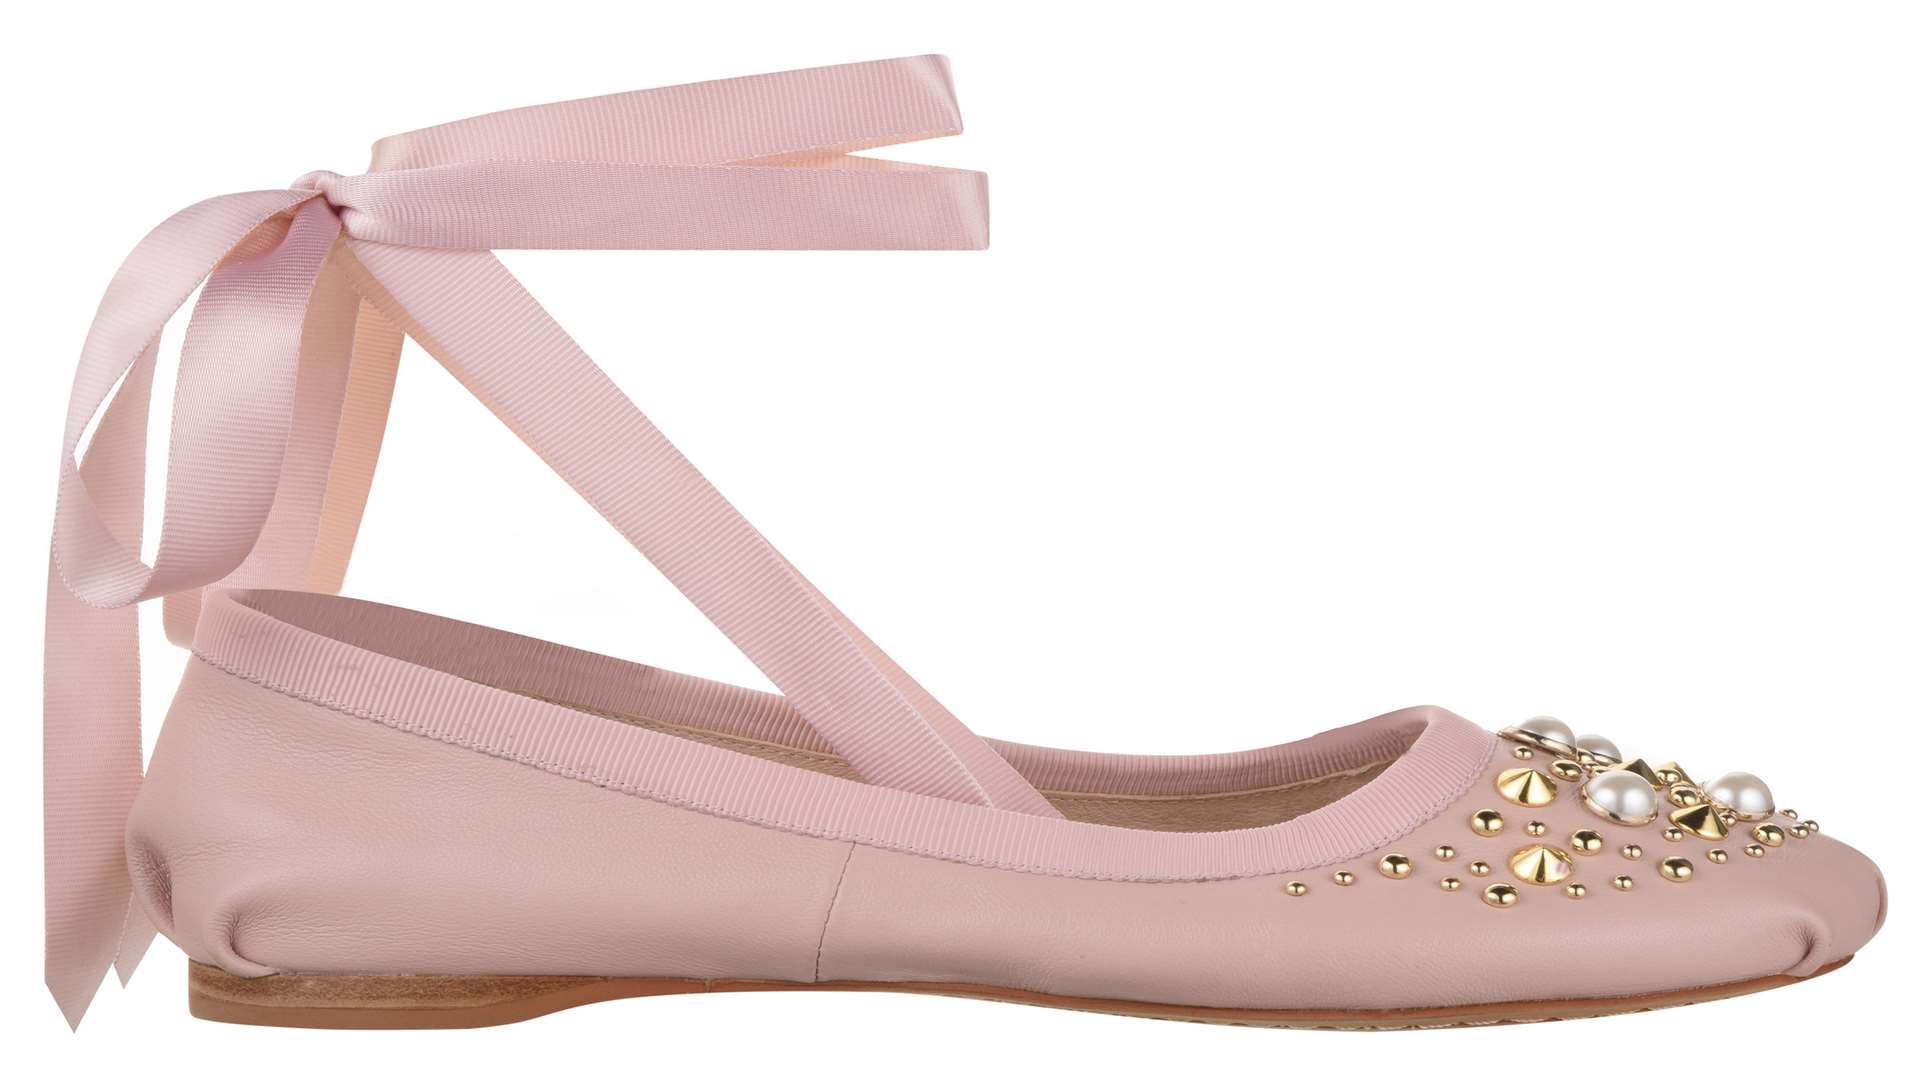 Having faded in the fashion firmament somewhat, the ballet flat is back, but this time, Kate Moss' mid-Noughties staple comes complete with ankle ribbons. This pair of pumps from Topshop is £39